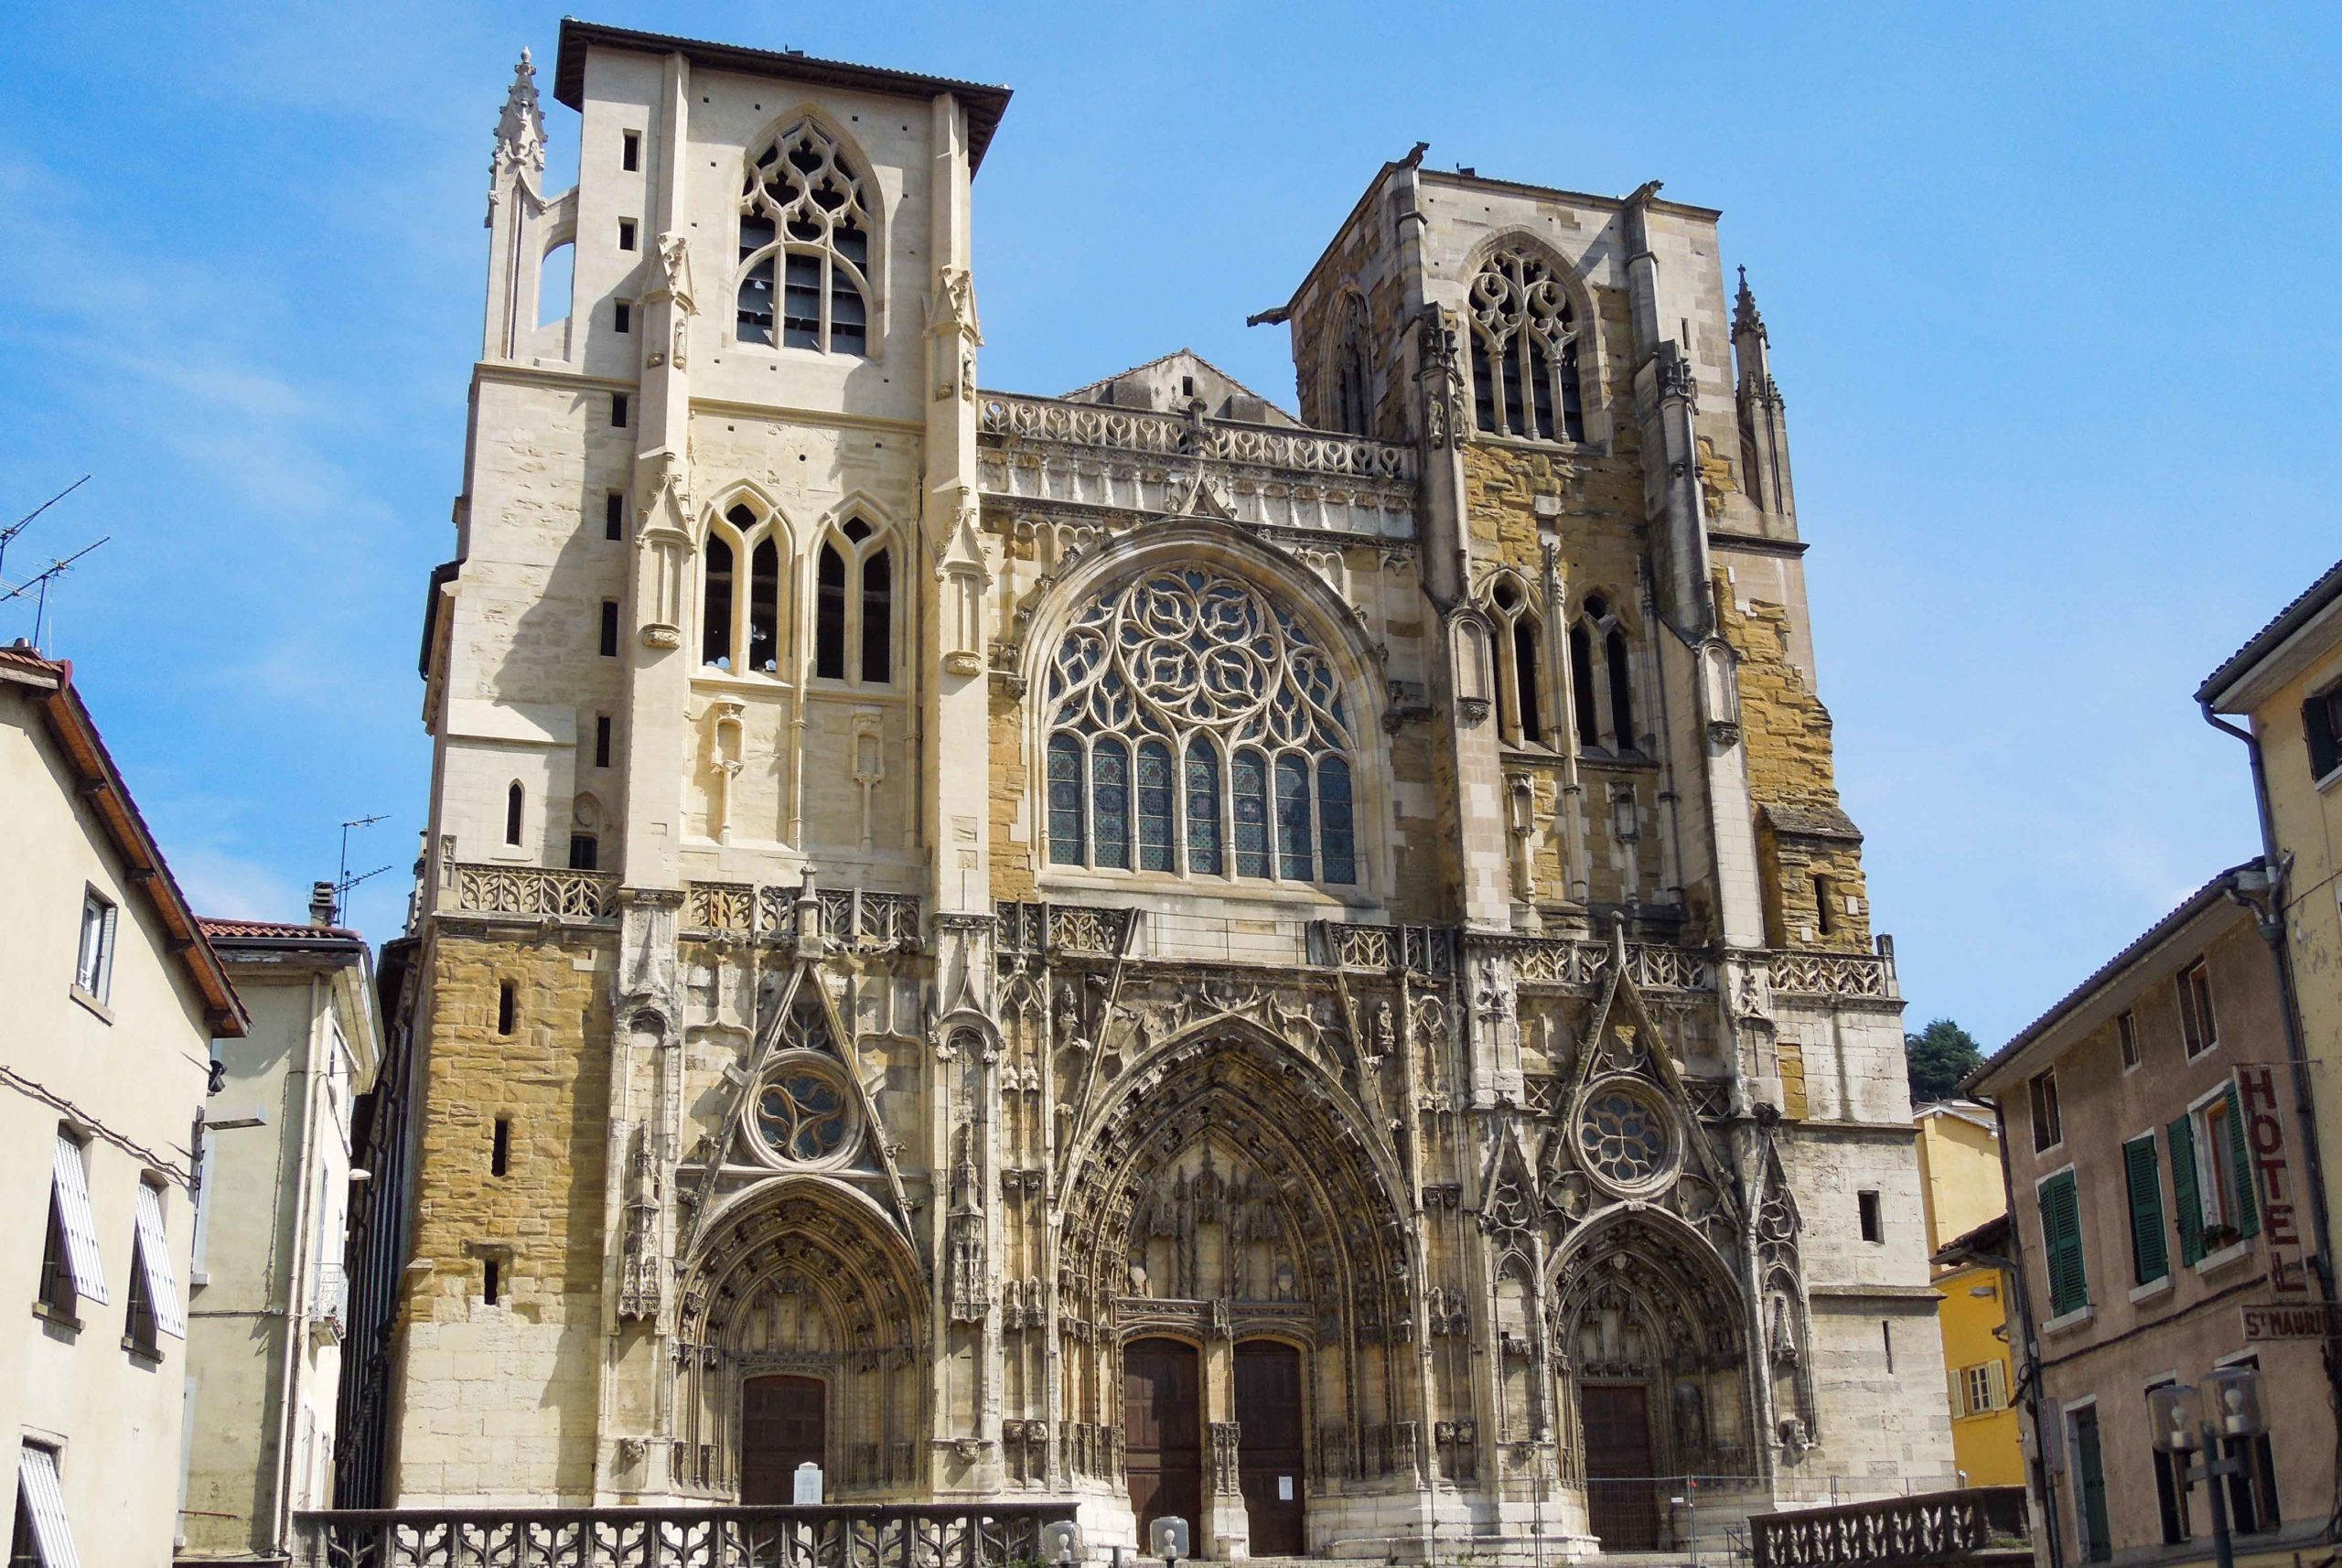 La cathédrale Saint-Maurice de Vienne © Aniacra - licence [CC BY-SA 4.0] from Wikimedia Commons